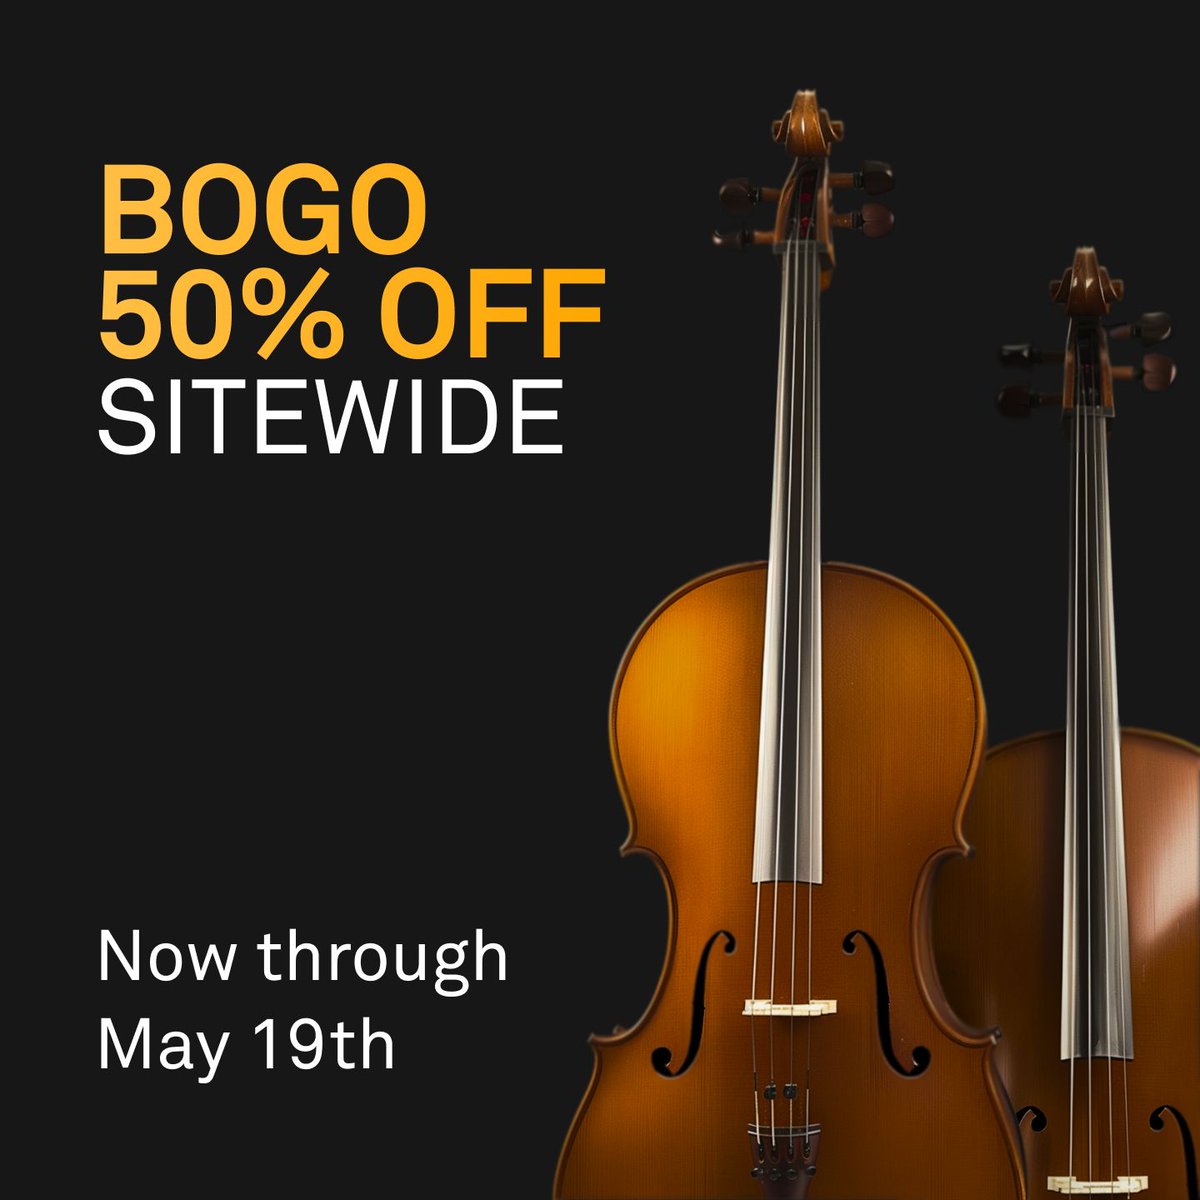 Buy any instrument library, get HALF OFF another! Hit the link to complete your 8Dio ensemble and save hundreds. buff.ly/4b6fBq9 

#8dio #virtualinstruments #composer #musicproducer #freeplugins #filmscoring #composition #bogo

Limit 1 per customer, sale excludes bundles.